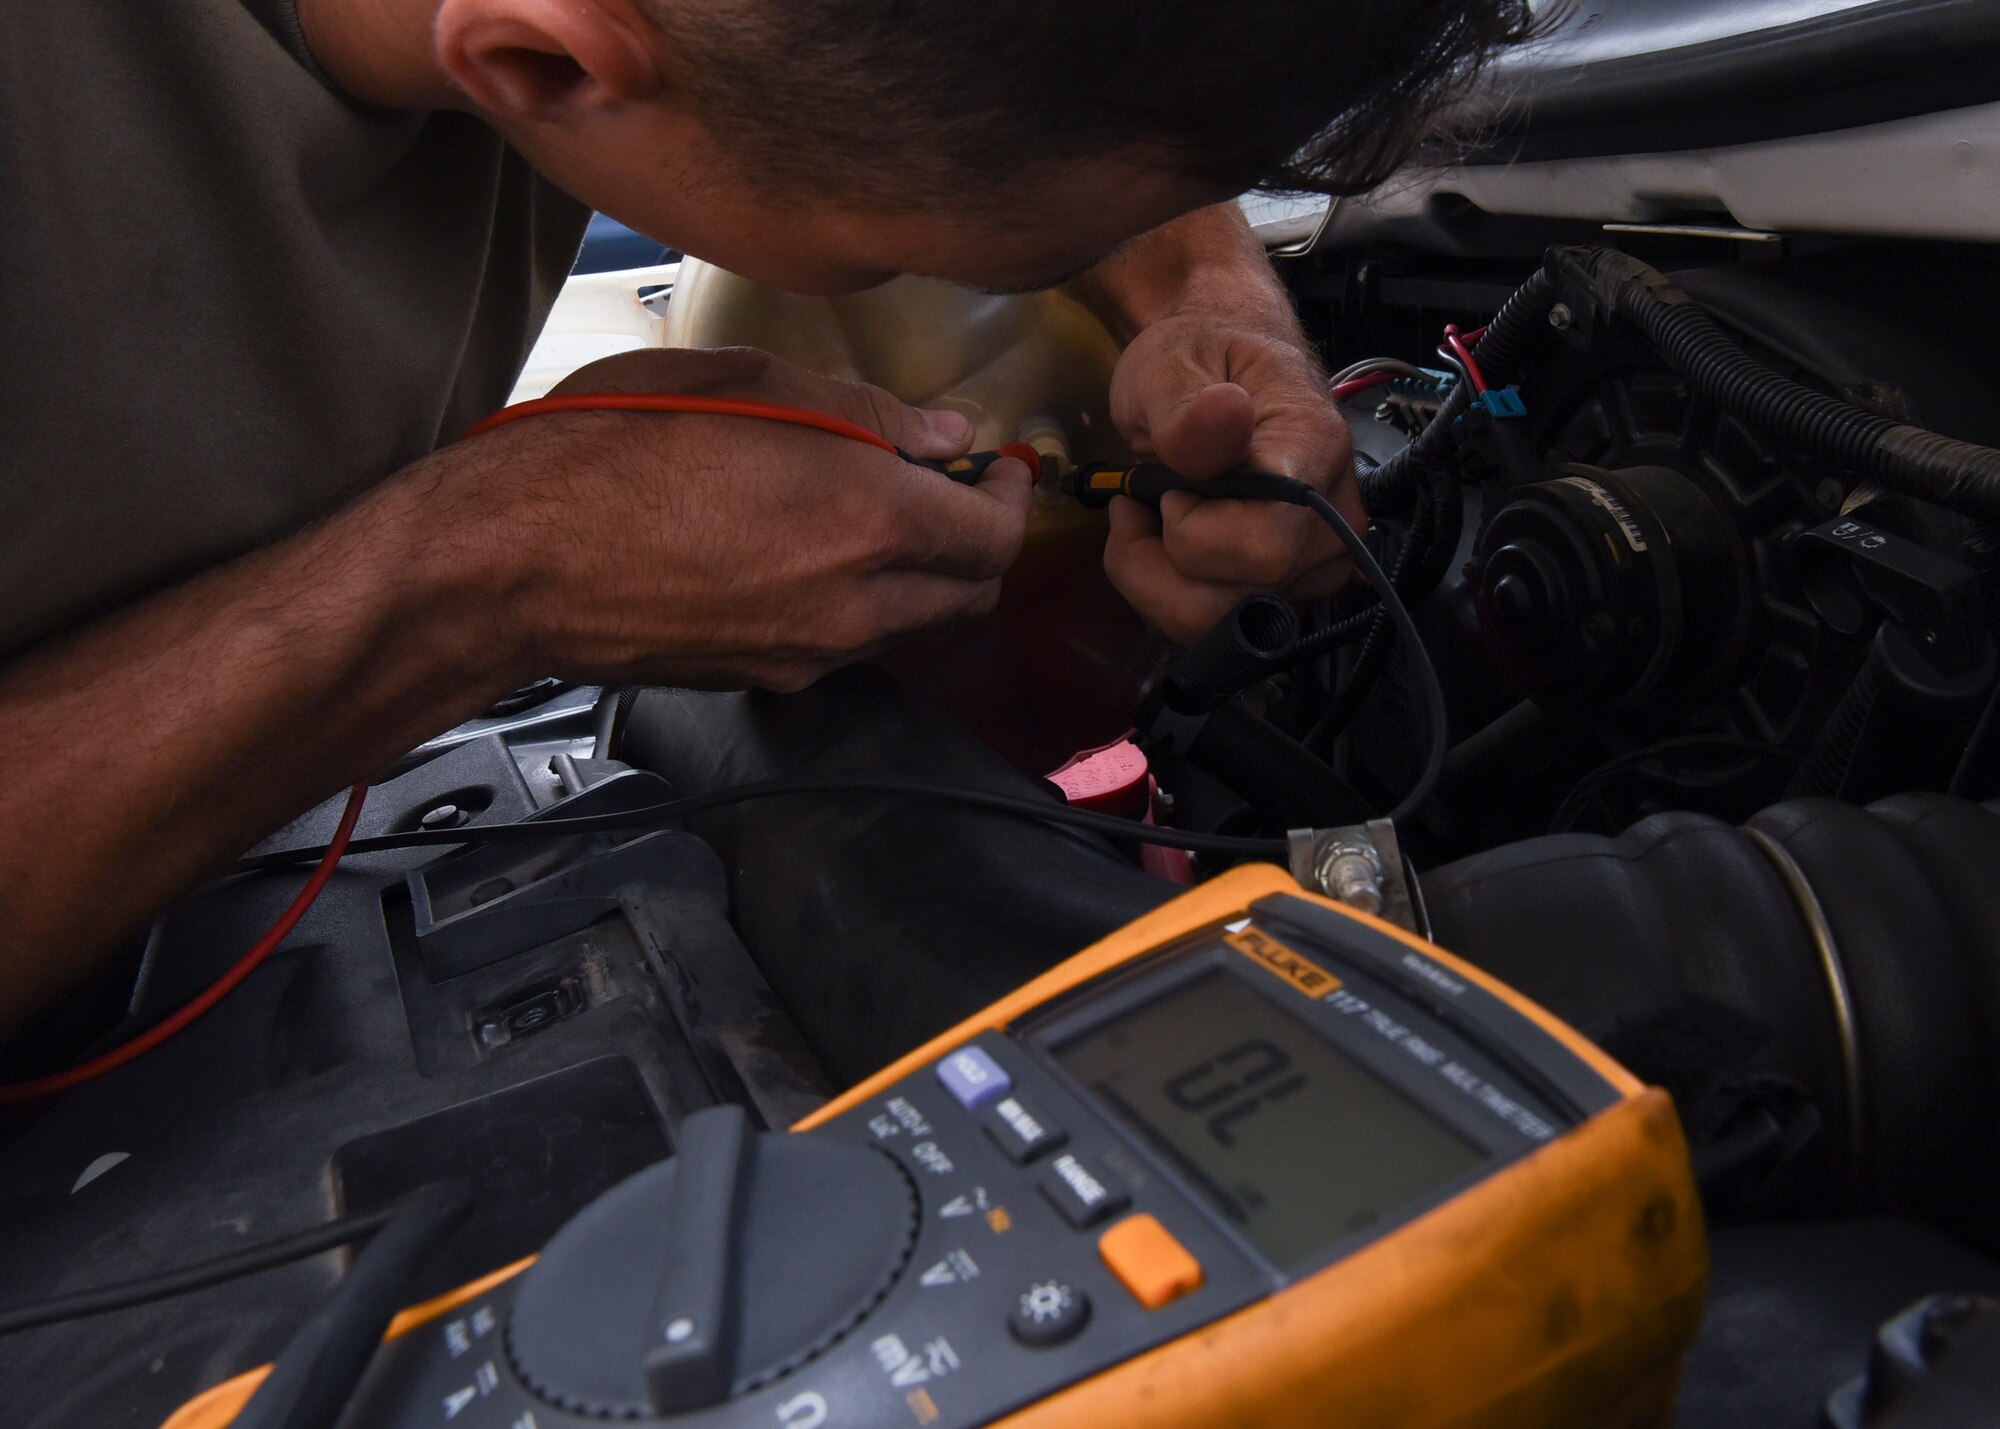 Tech. Sgt. John Bishop, 8th Logistics Readiness Squadron NCO in charge of vehicle maintenance, inspects a vehicle at Kunsan Air Base, Republic of Korea, June 4, 2020. Bishop is troubleshooting a low coolant light on the vehicle by checking the voltage to ensure the sensor is getting power. (U.S. Air Force photo by Staff Sgt. Anthony Hetlage)